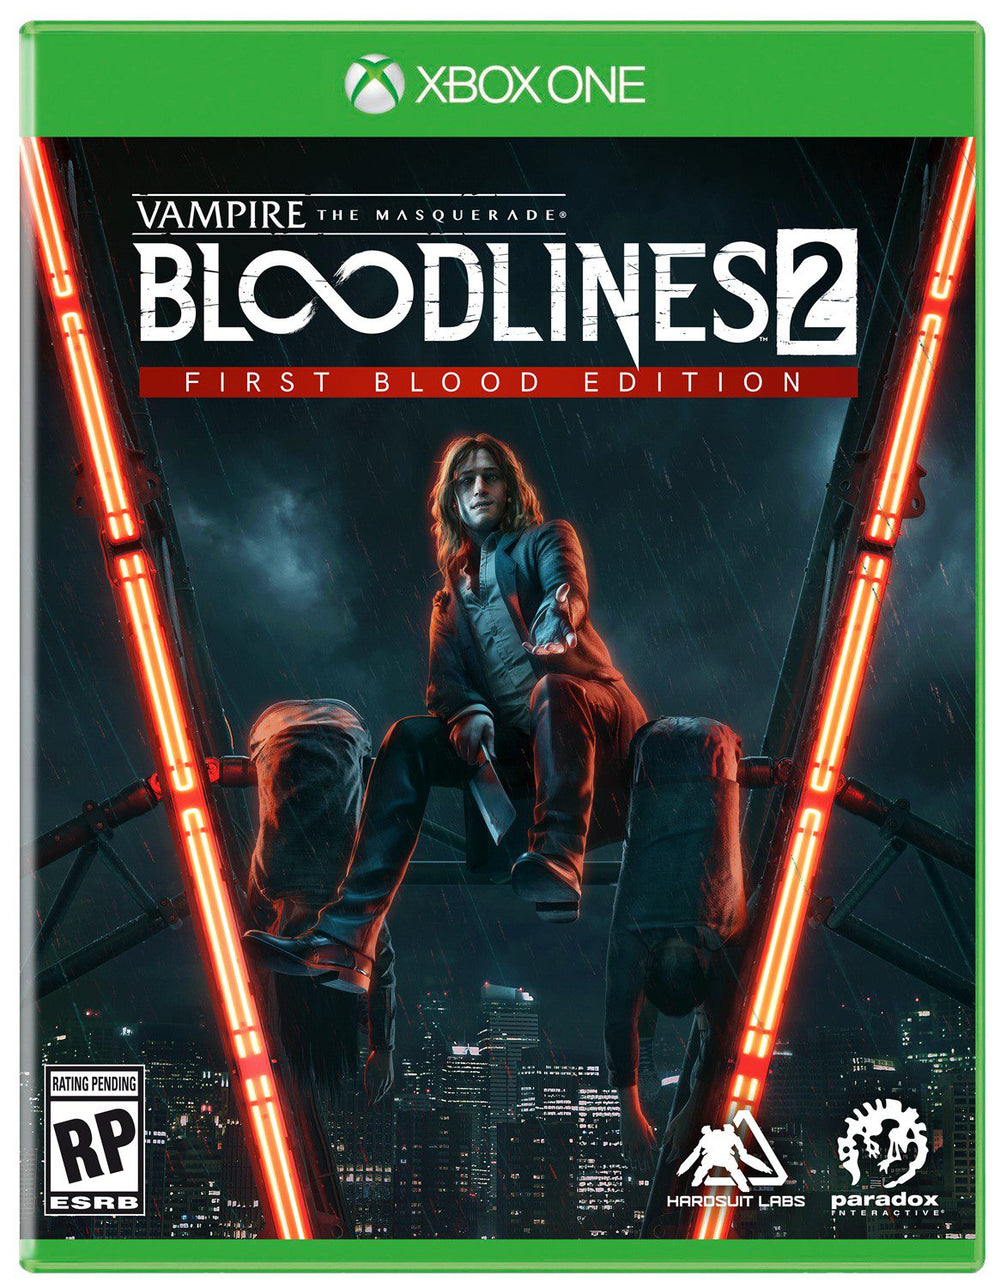 Vampire: The Masquerade - Bloodlines 2 (First Blood Edition) [XB1]